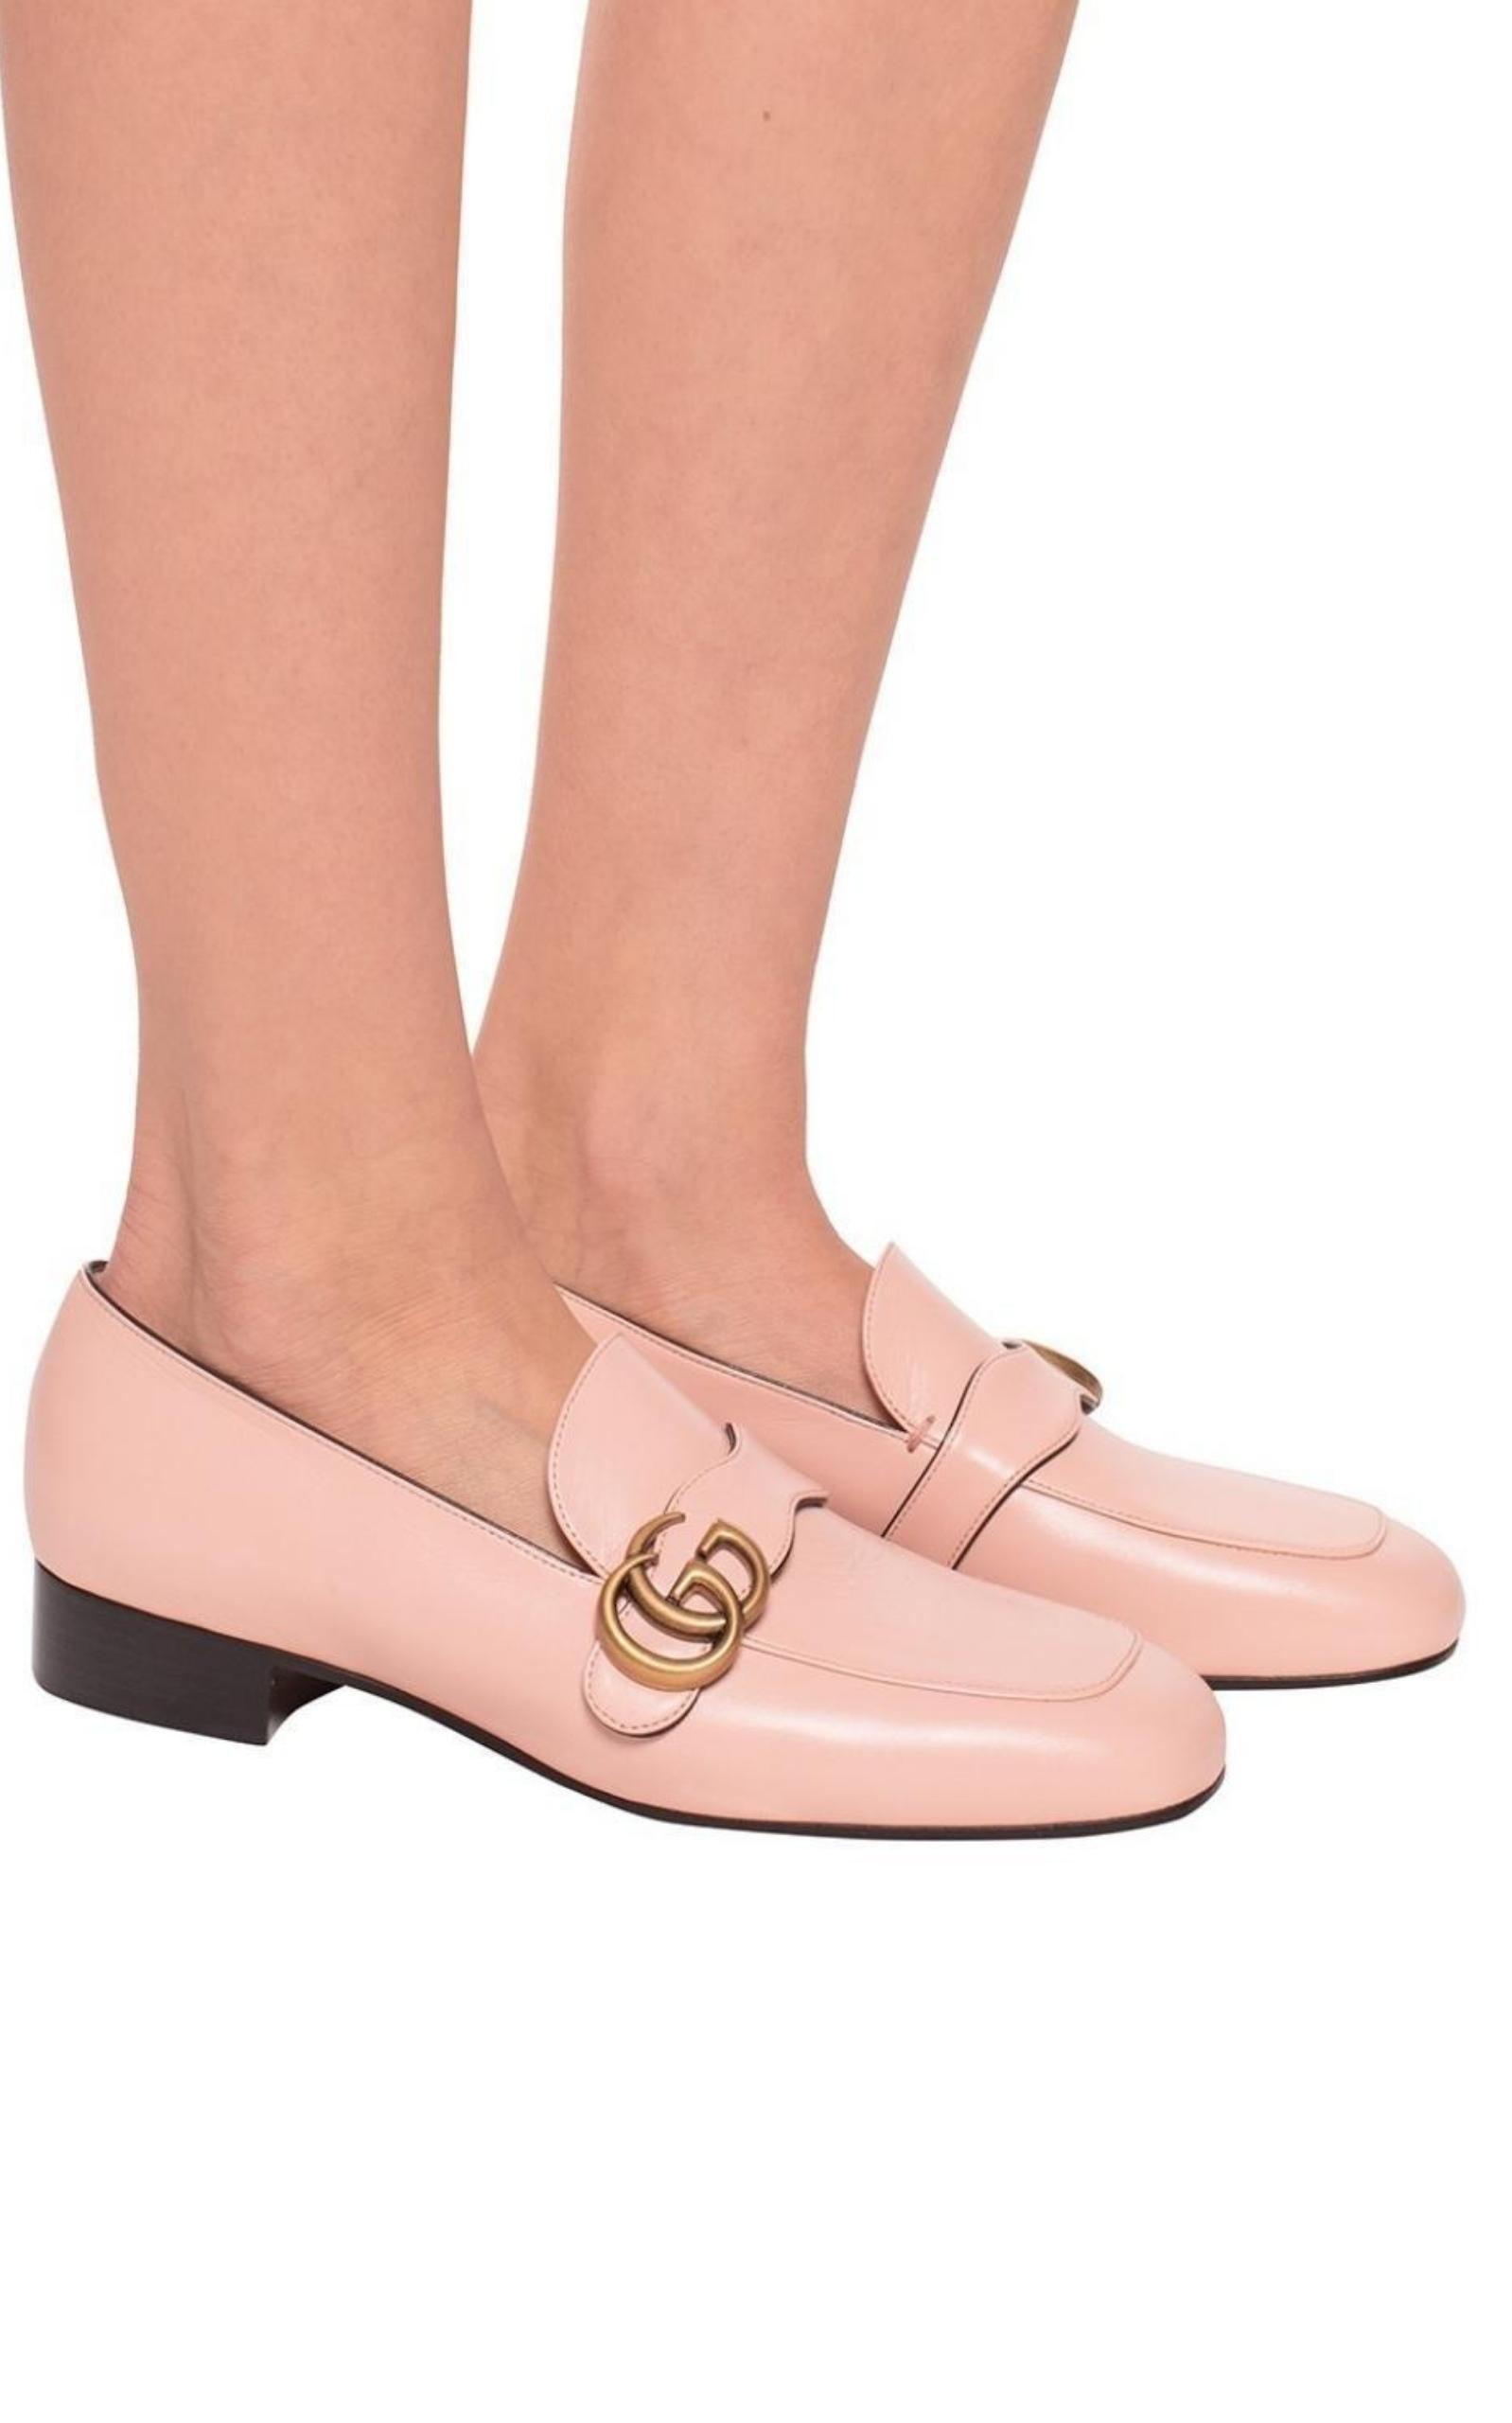 GUCCI GG Marmont Leather Loafers for Women